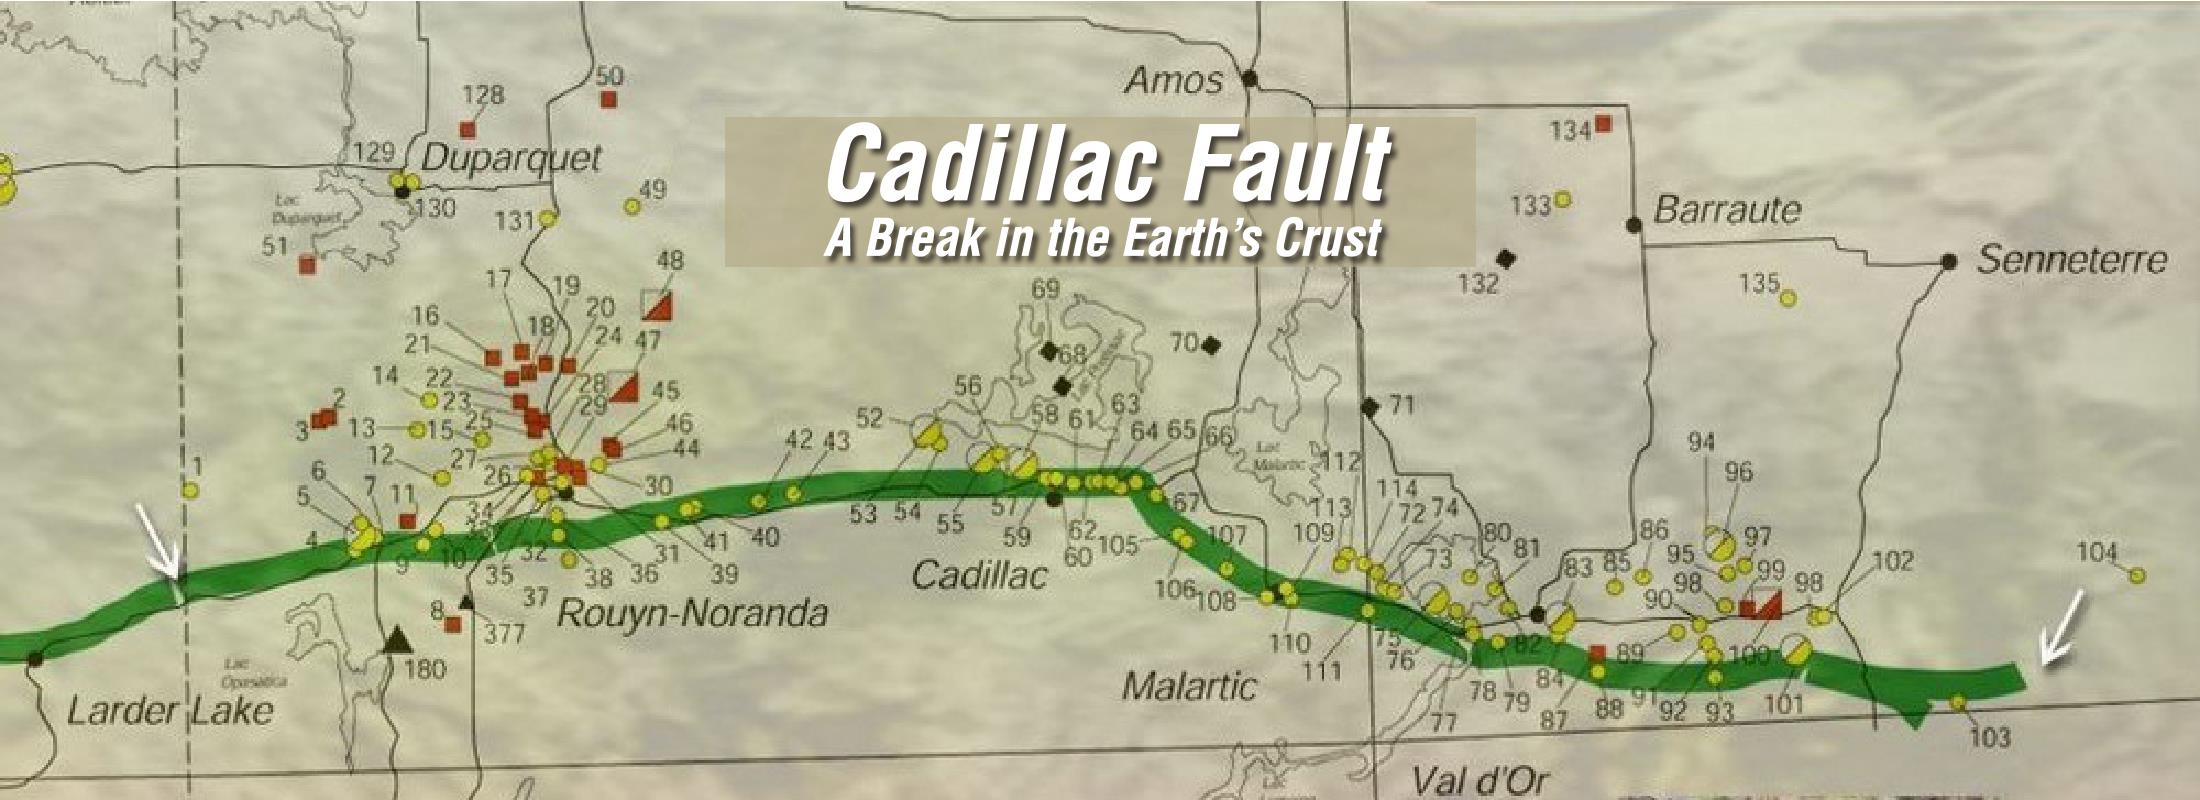 A map showing part of the Cadillac Fault located in Abitibi-Témiscamingue